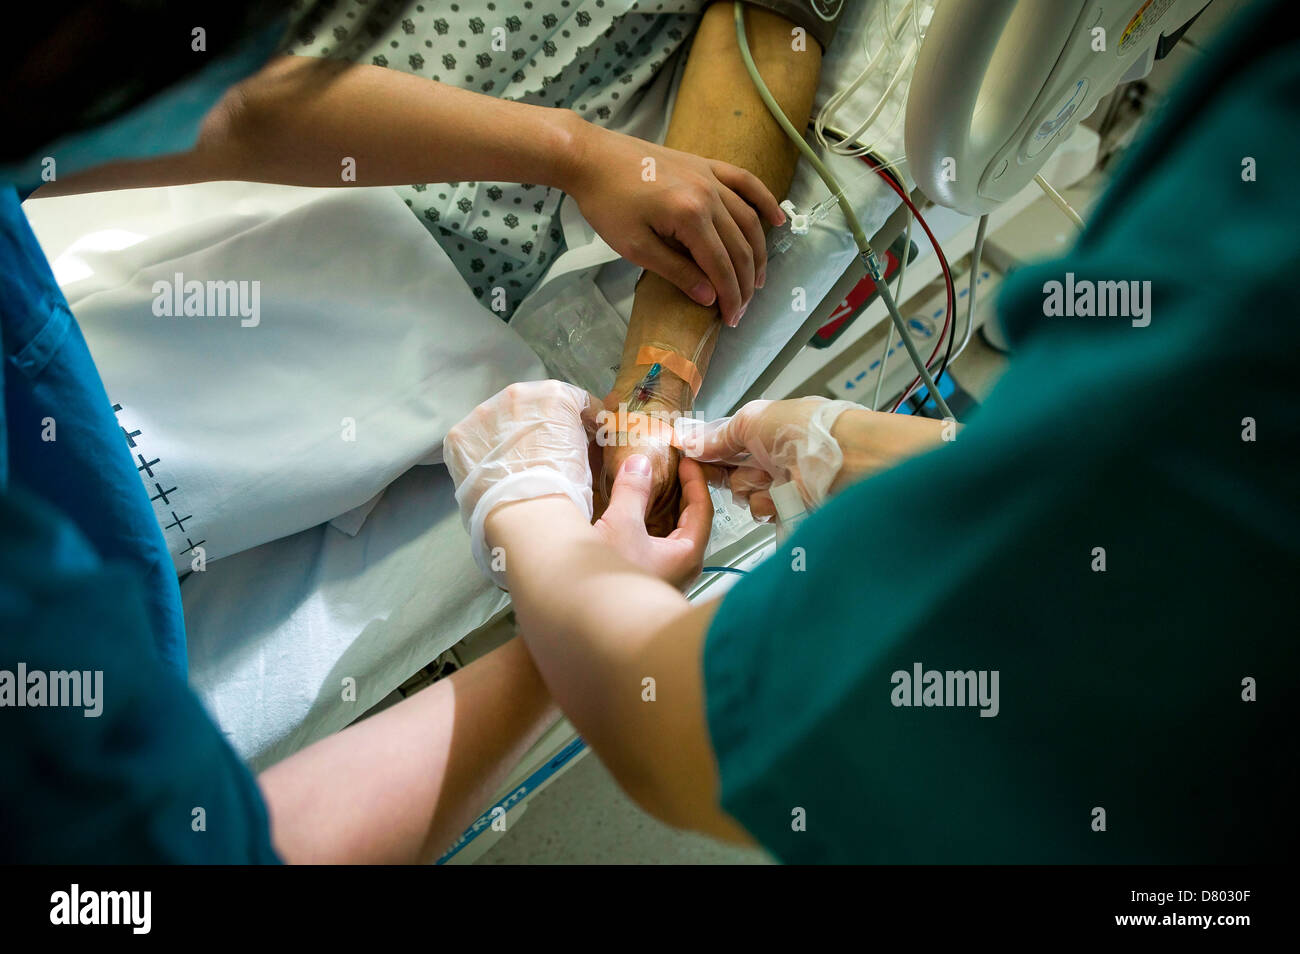 A patient has an intravenous drip inserted into the arm, on an intensive care unit. Stock Photo